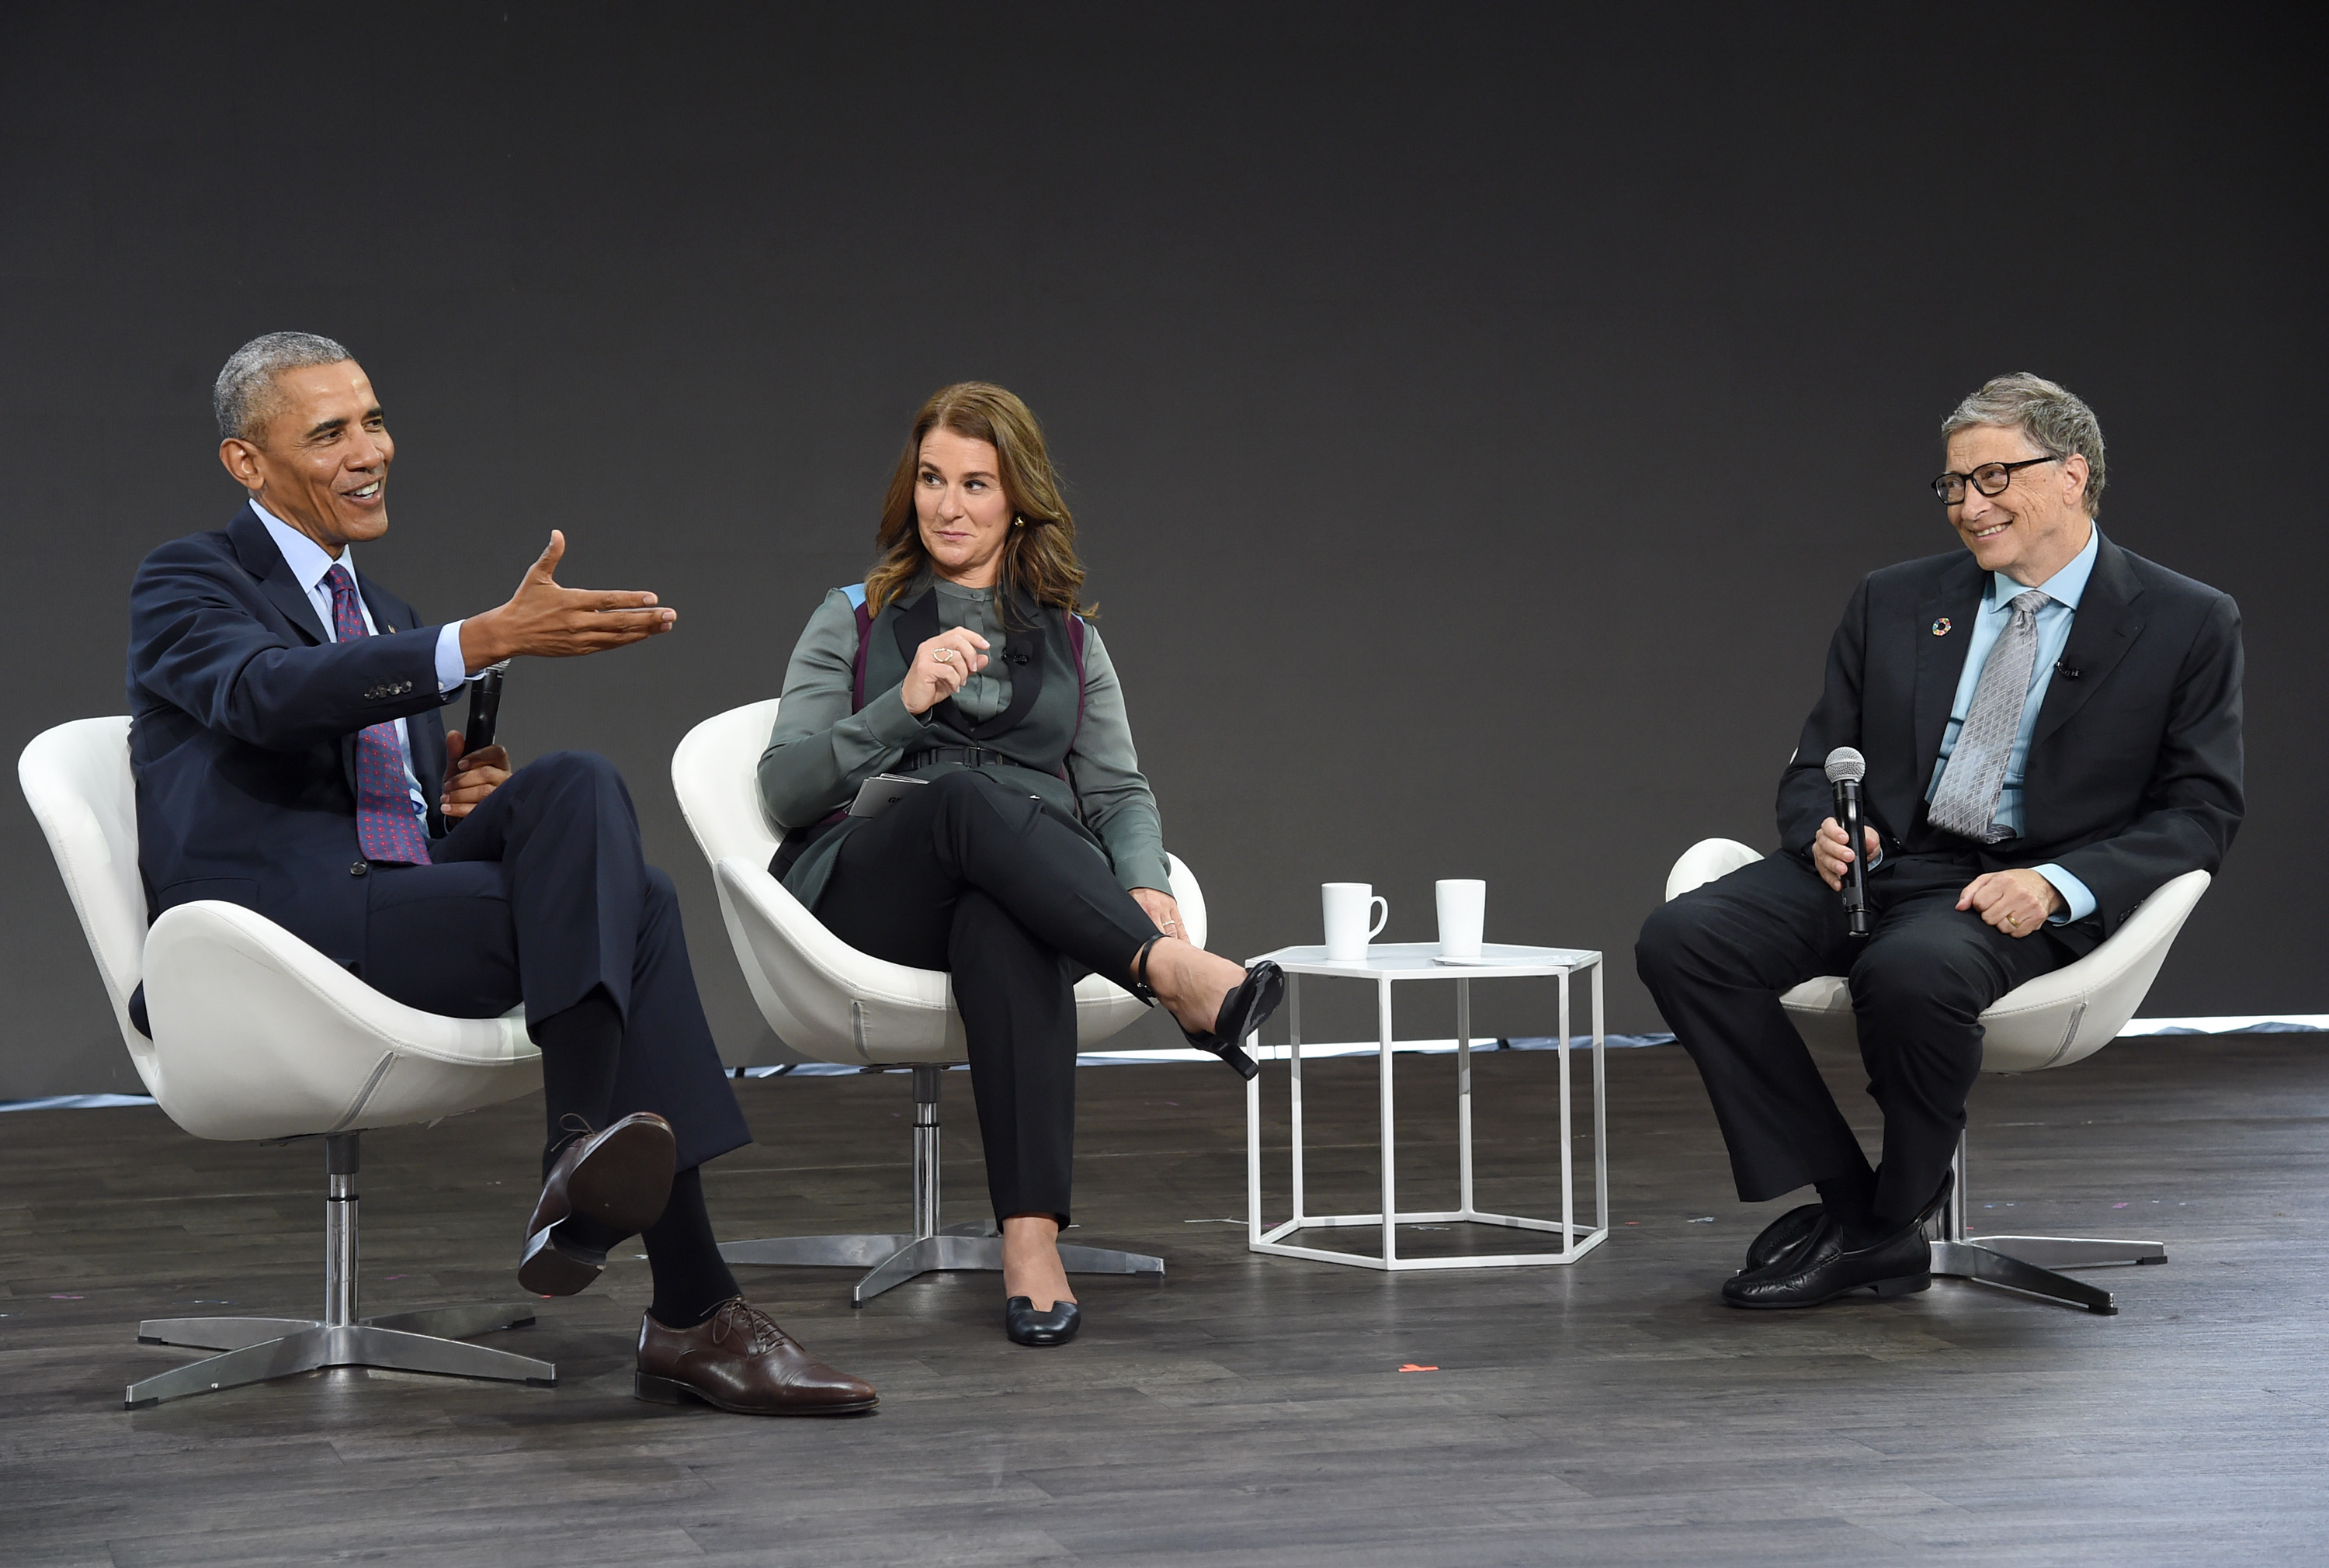 President Barack Obama, Melinda Gates and Bill Gates speak at Goalkeepers 2017, at Jazz at Lincoln Center on September 20, 2017 in New York City.  Goalkeepers is organized by the Bill &amp; Melinda Gates Foundation to highlight progress against global poverty and disease, showcase solutions to help advance the Sustainable Development Goals (or Global Goals) and foster bold leadership to help accelerate the path to a more prosperous, healthy and just future. (Jamie McCarthy—Getty Images for Bill &amp; Melinda Gates Foundation)